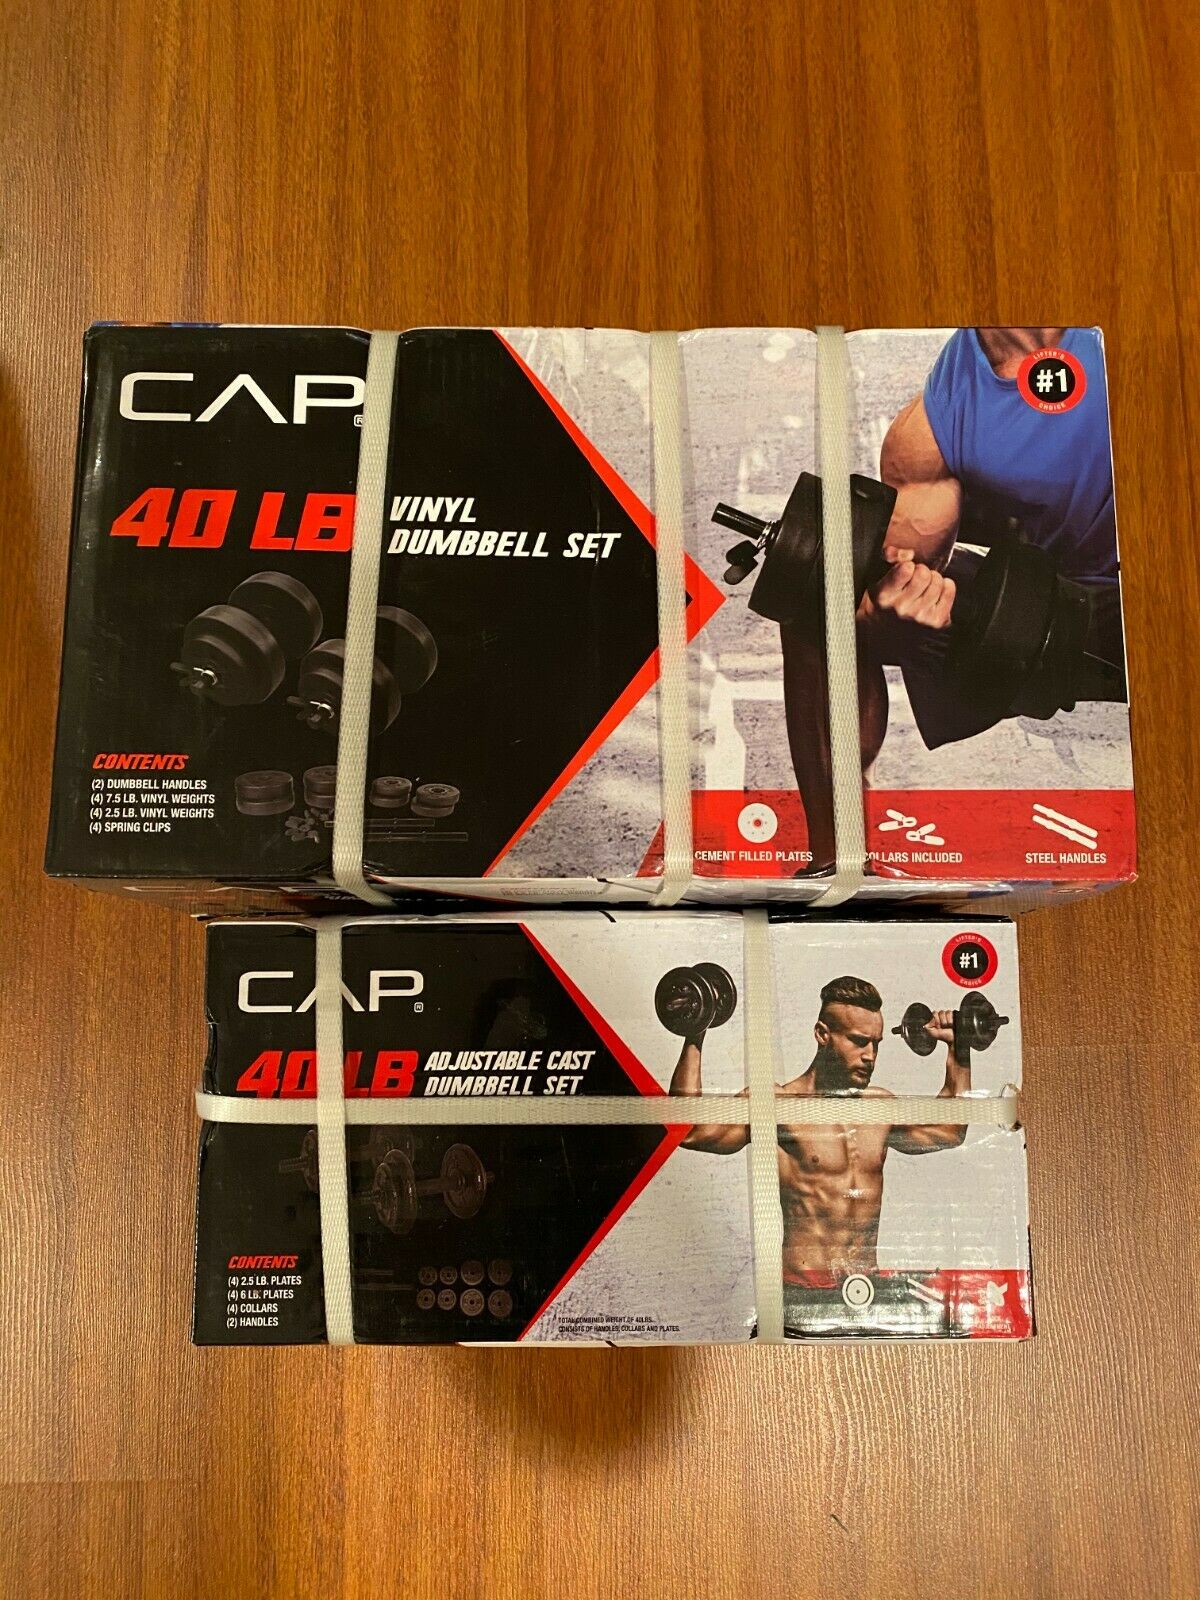 New Cap Adjustable Dumbbell 40lb Sets - Choose Weight When Working Out